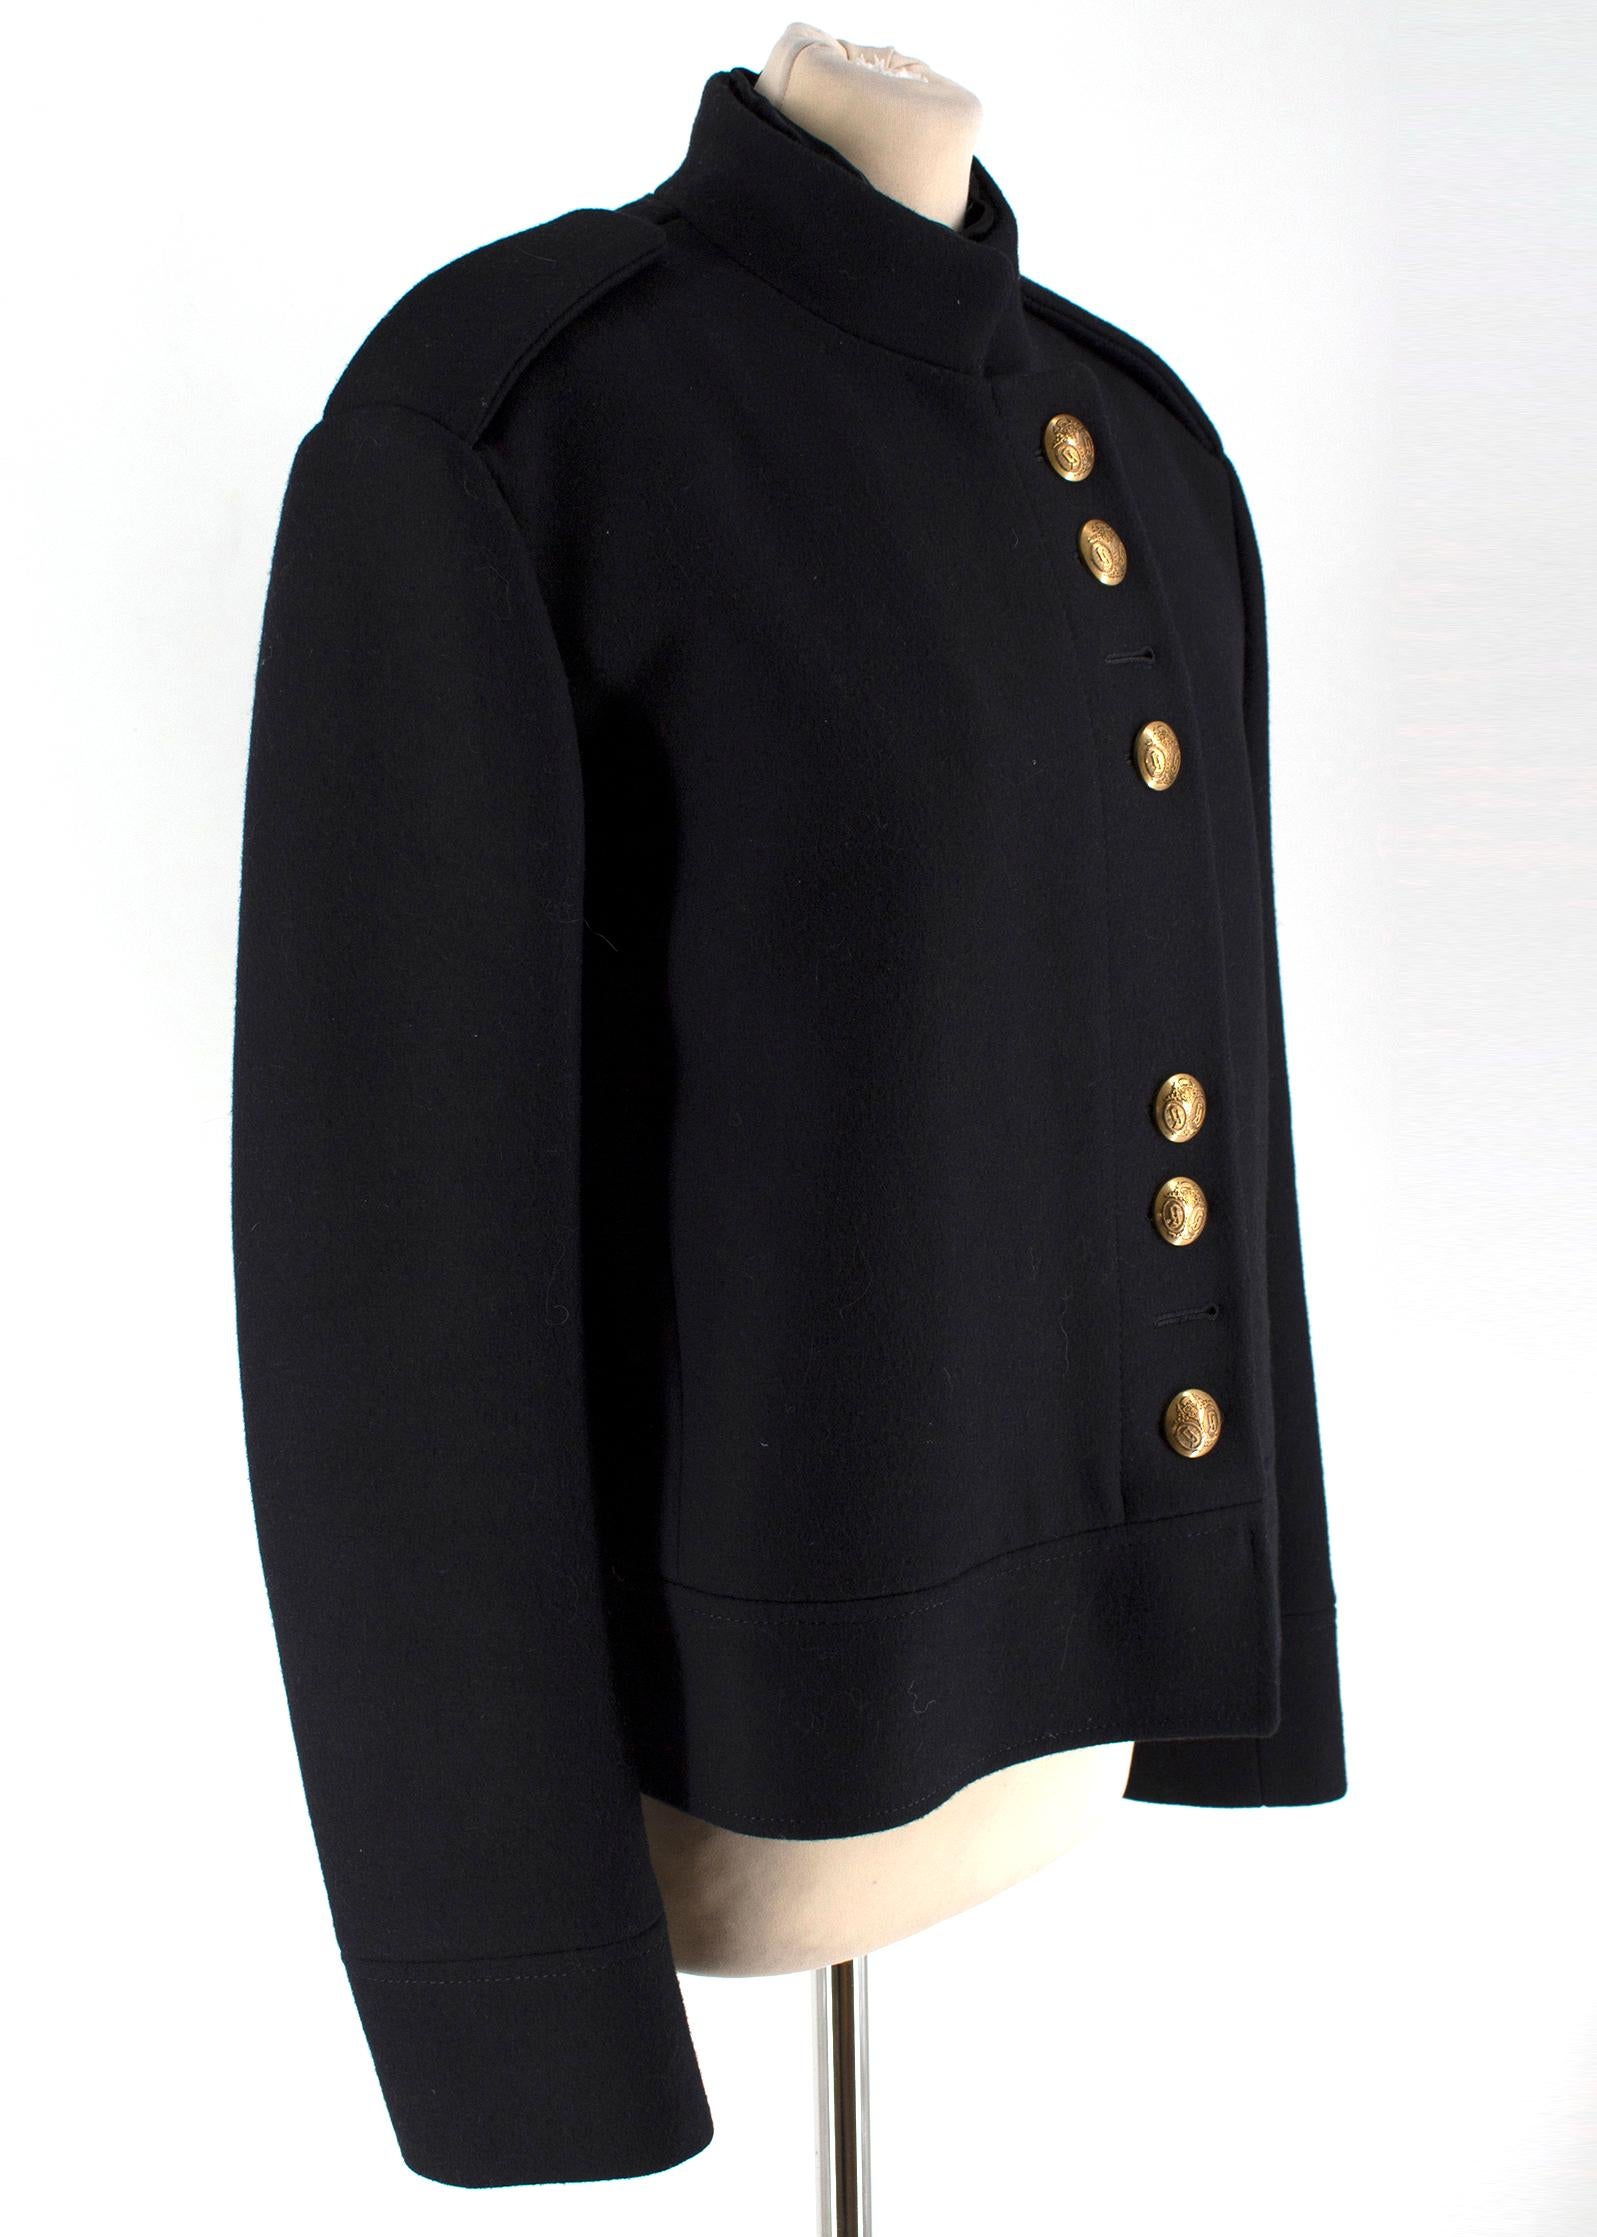 Gucci Black Military Wool Coat

-Black wool coat with gold toned buttons
-Embossed buttons
-Epaulettes
-Quilted lining
-Button closure with hook and eye closure

Please note, these items are pre-owned and may show signs of being stored even when